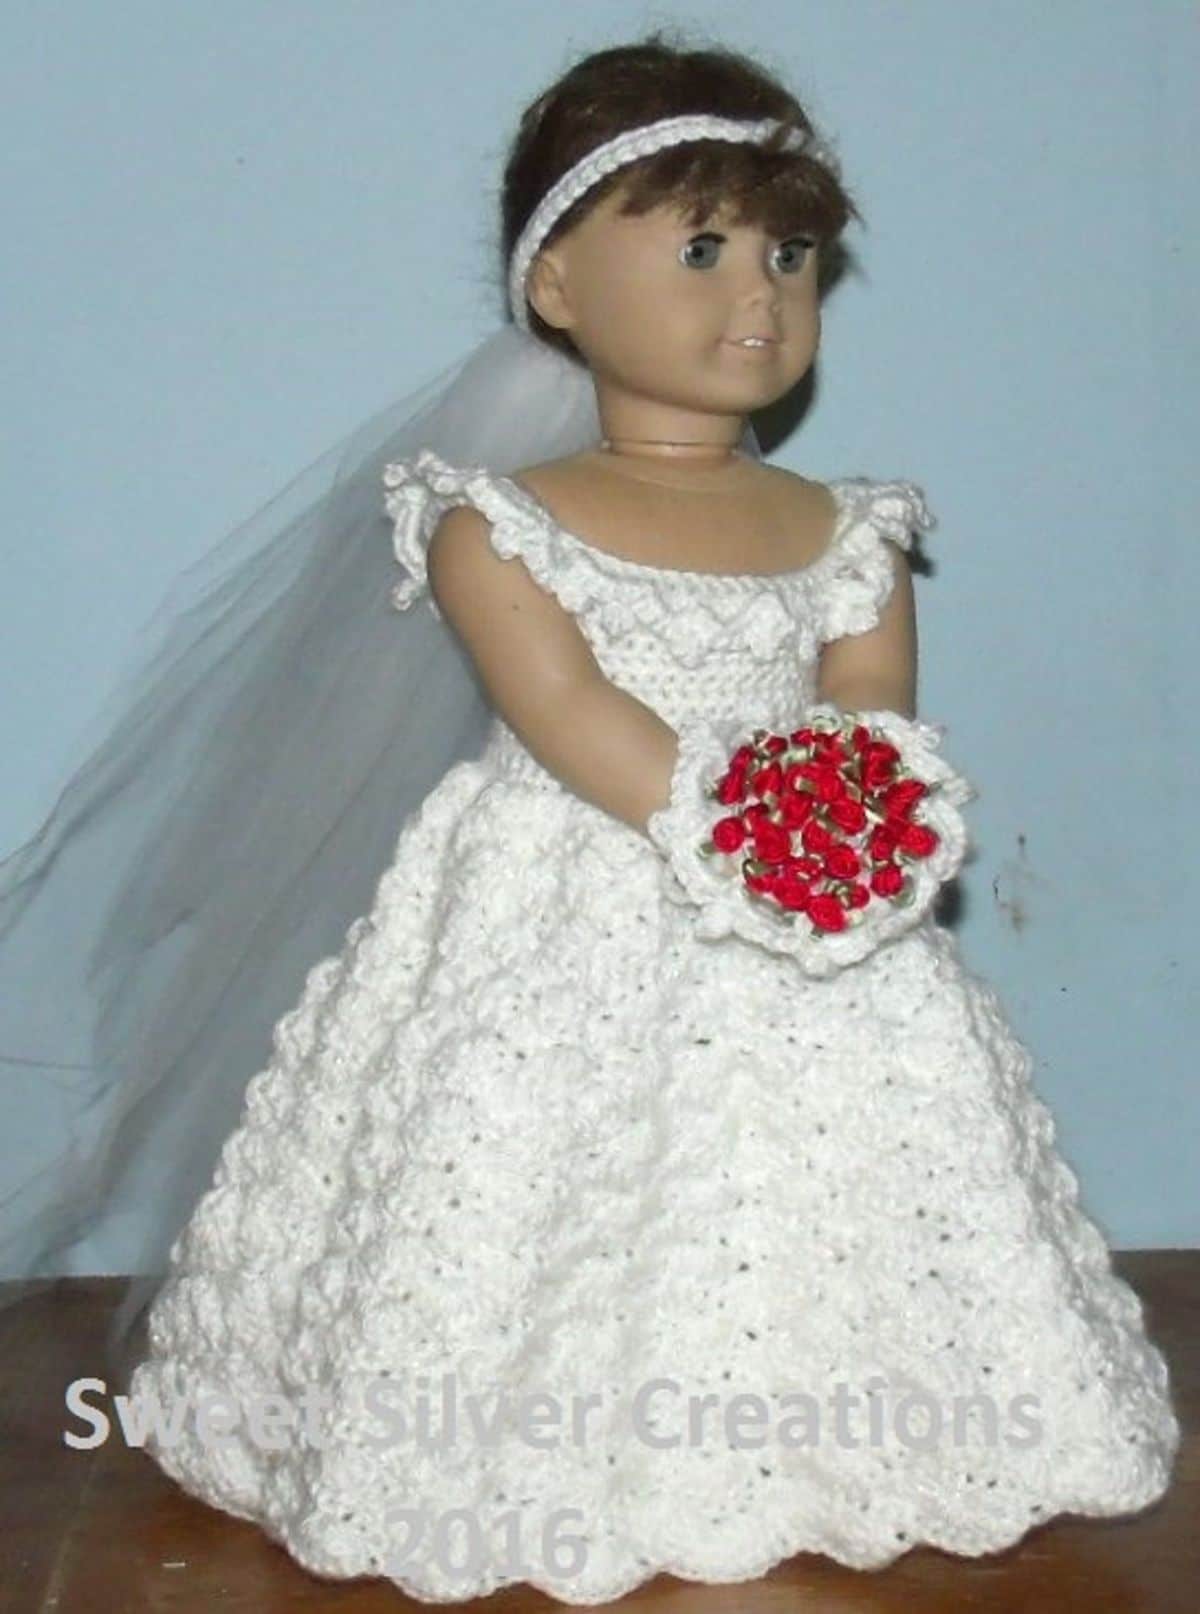 Brunette doll wearing a veil, crochet sleeveless wedding dress with a scoop neck and full skirt, holding a white and red bouquet. 